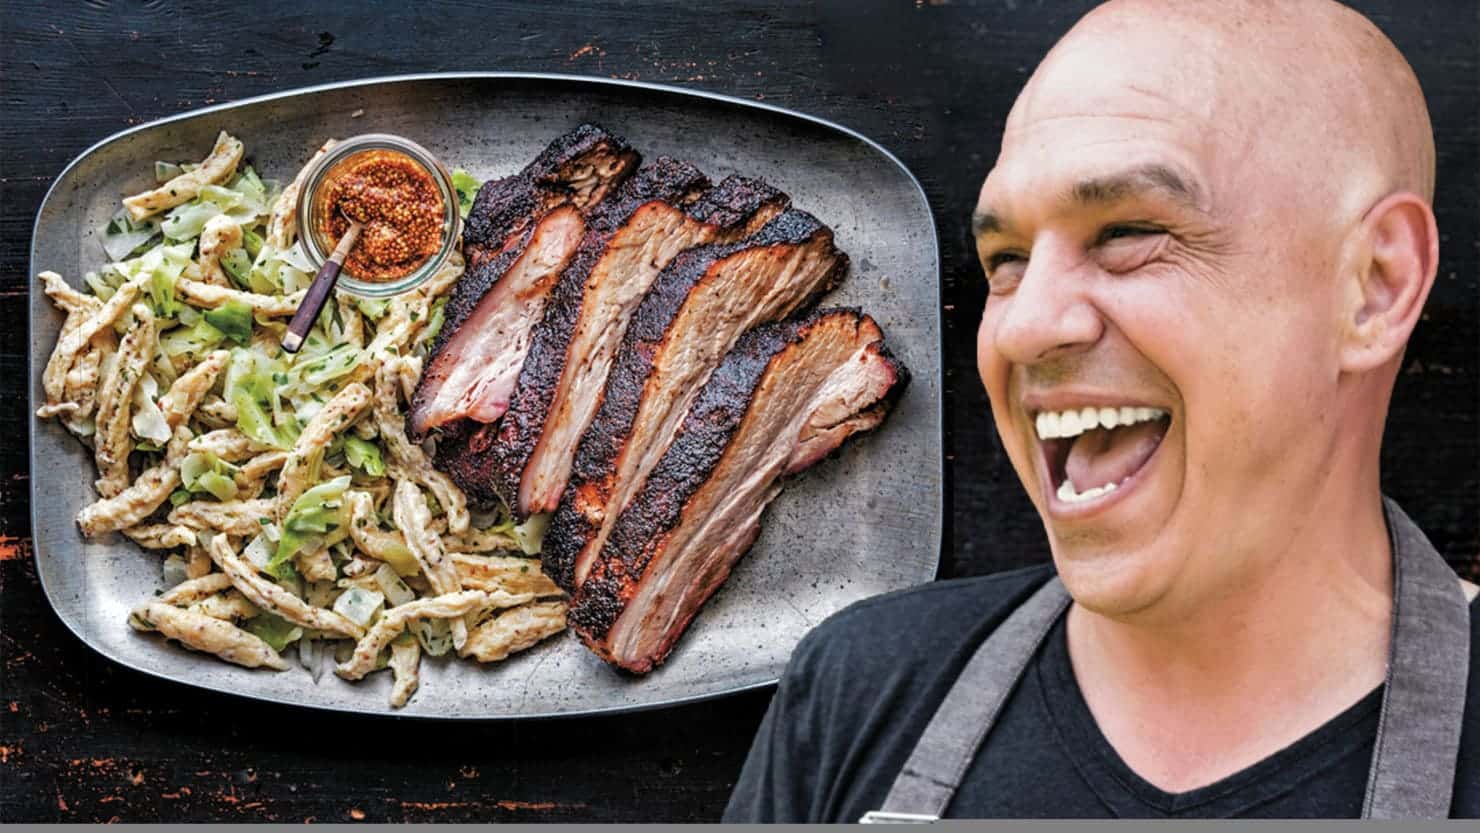 Michael Symon's Recipe for Cleveland-Style Smoked Pork Belly Featured by Daily Beast